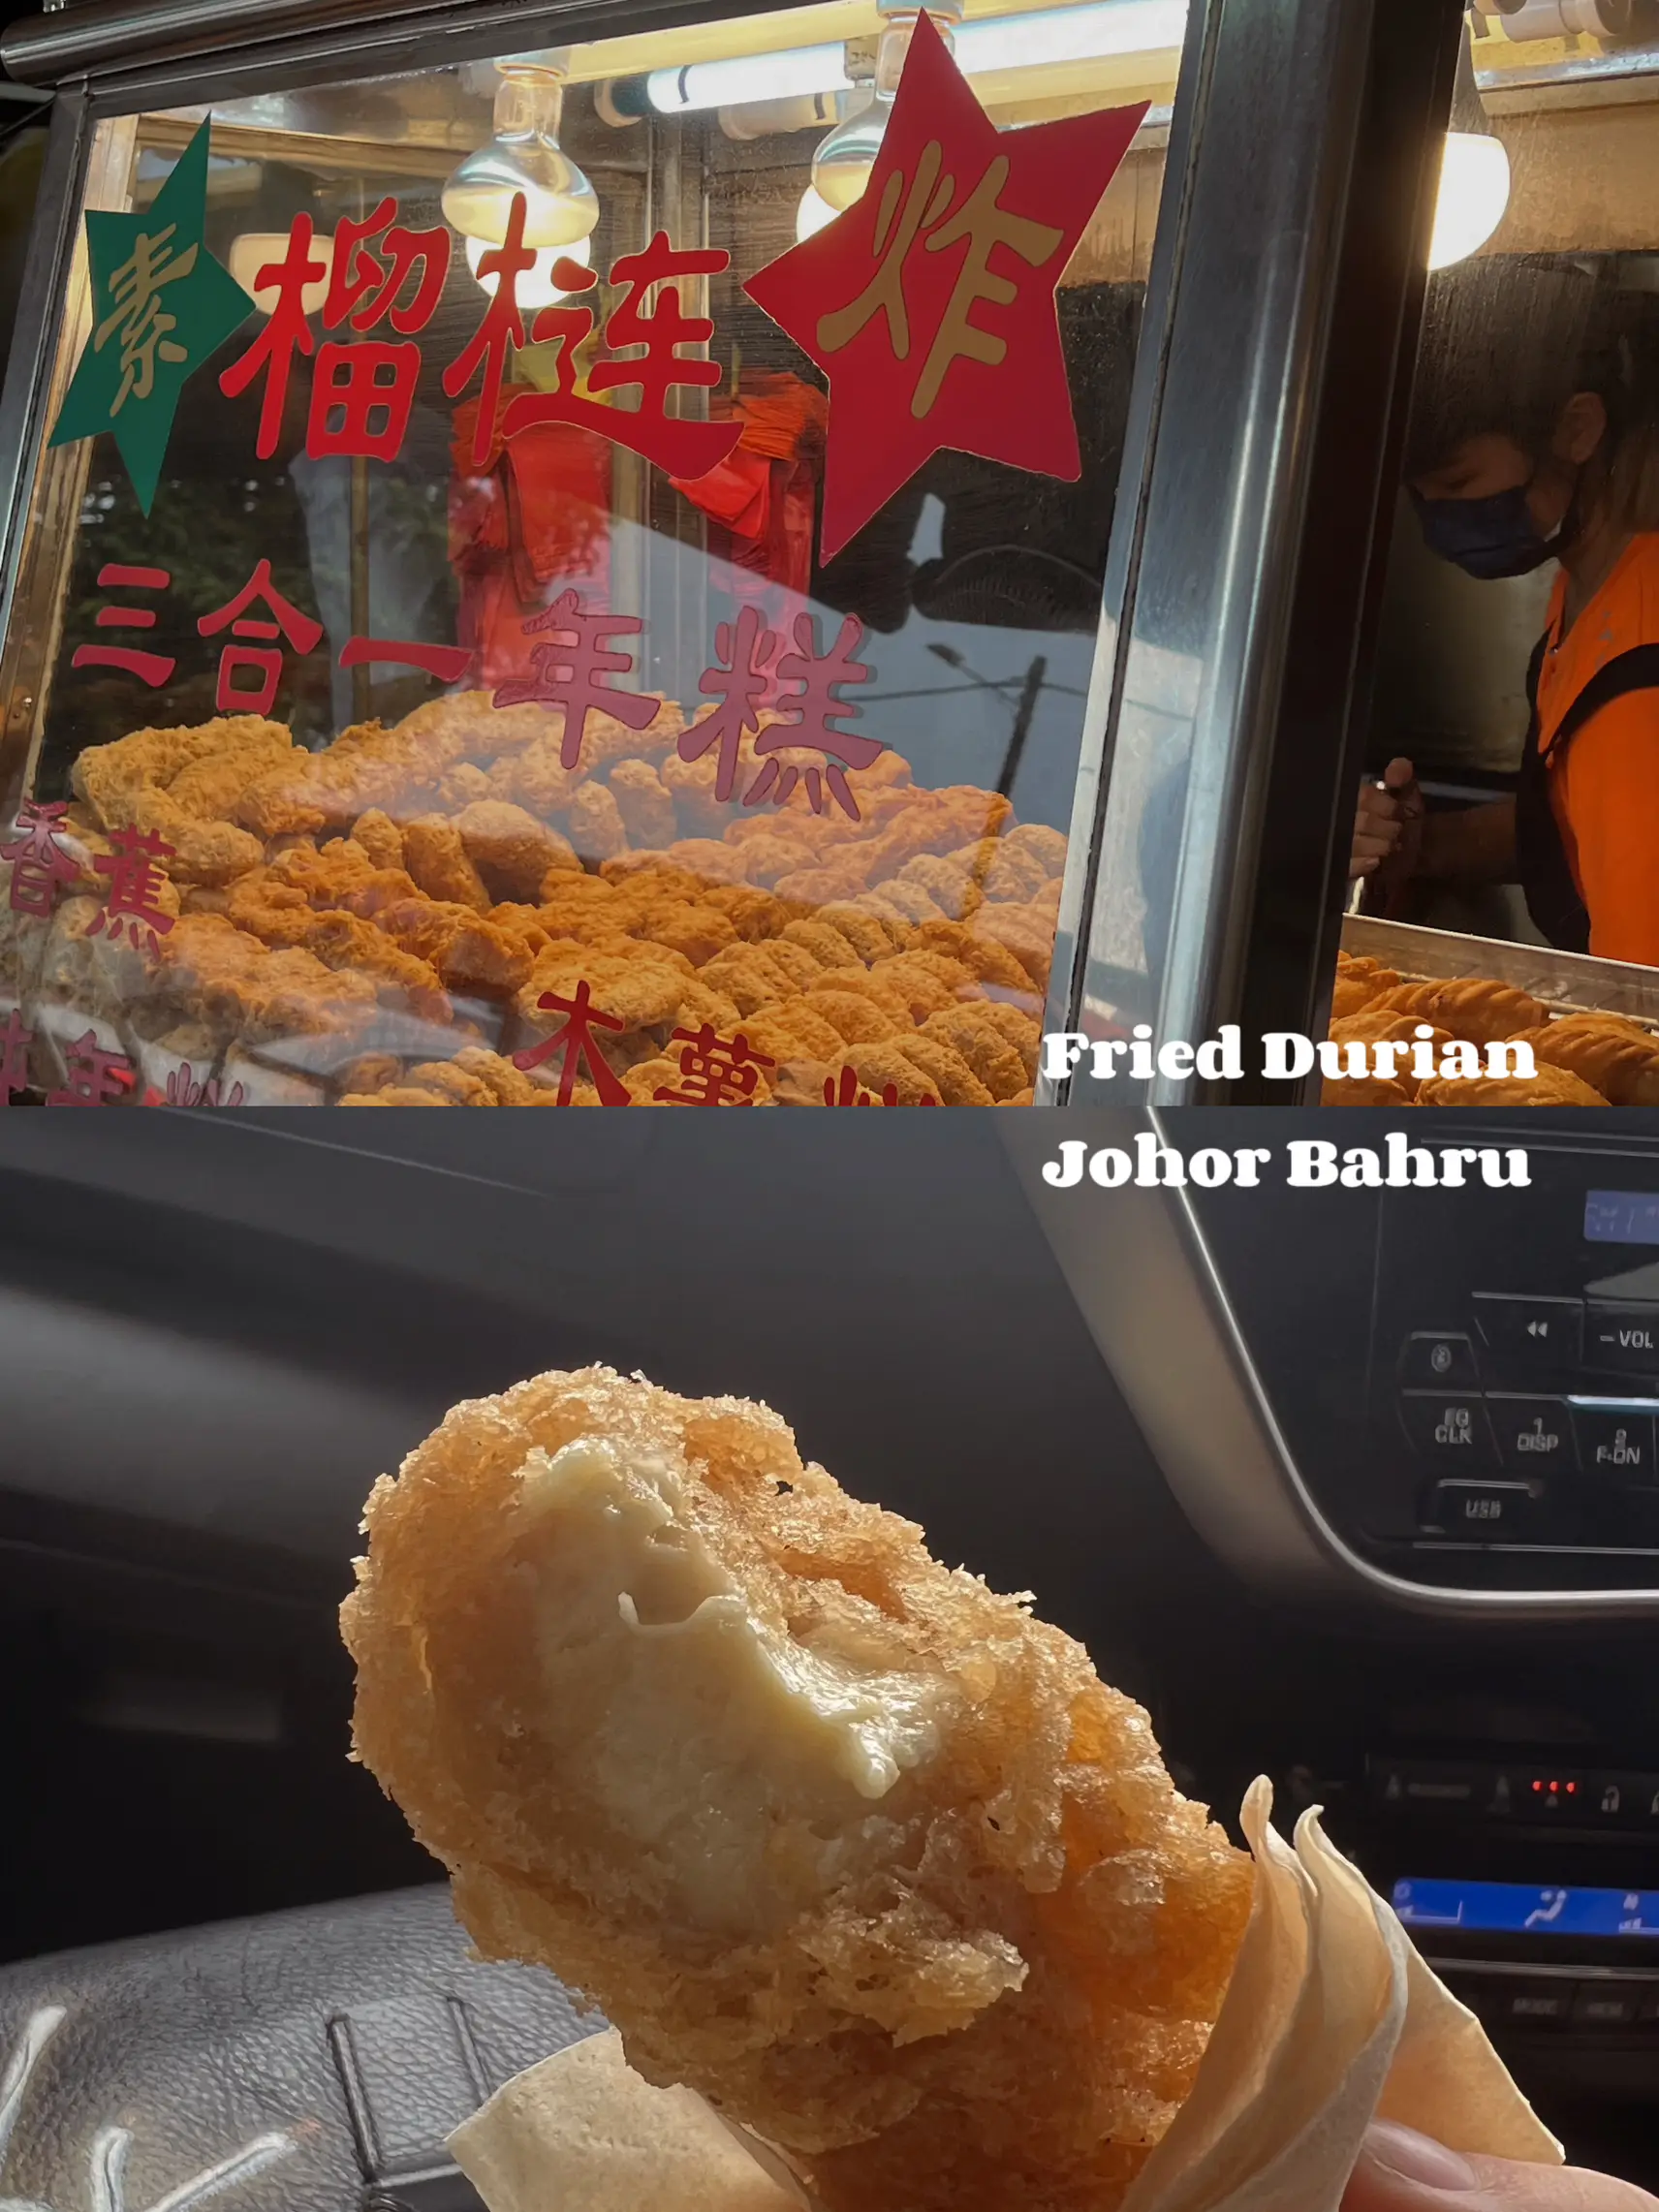 Fried Durian / 年糕 in Johor Bahru's images